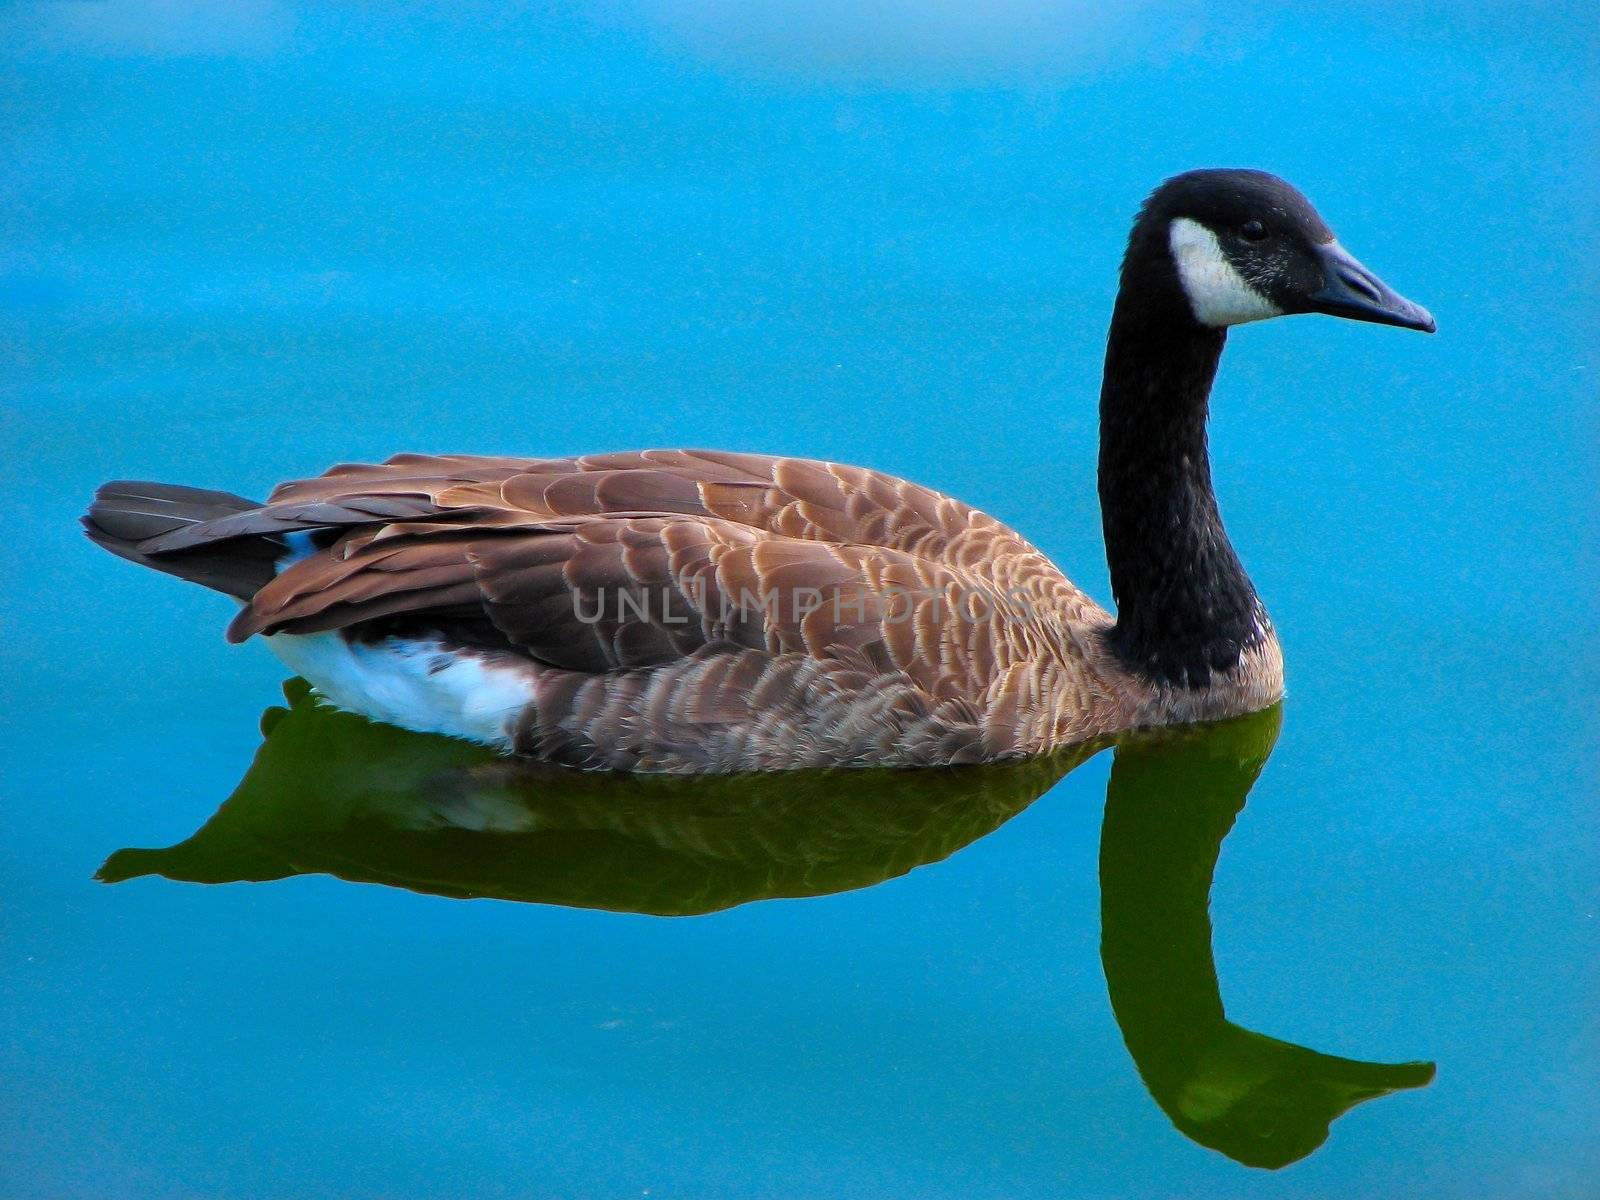 Goose in the blue water by vadimone